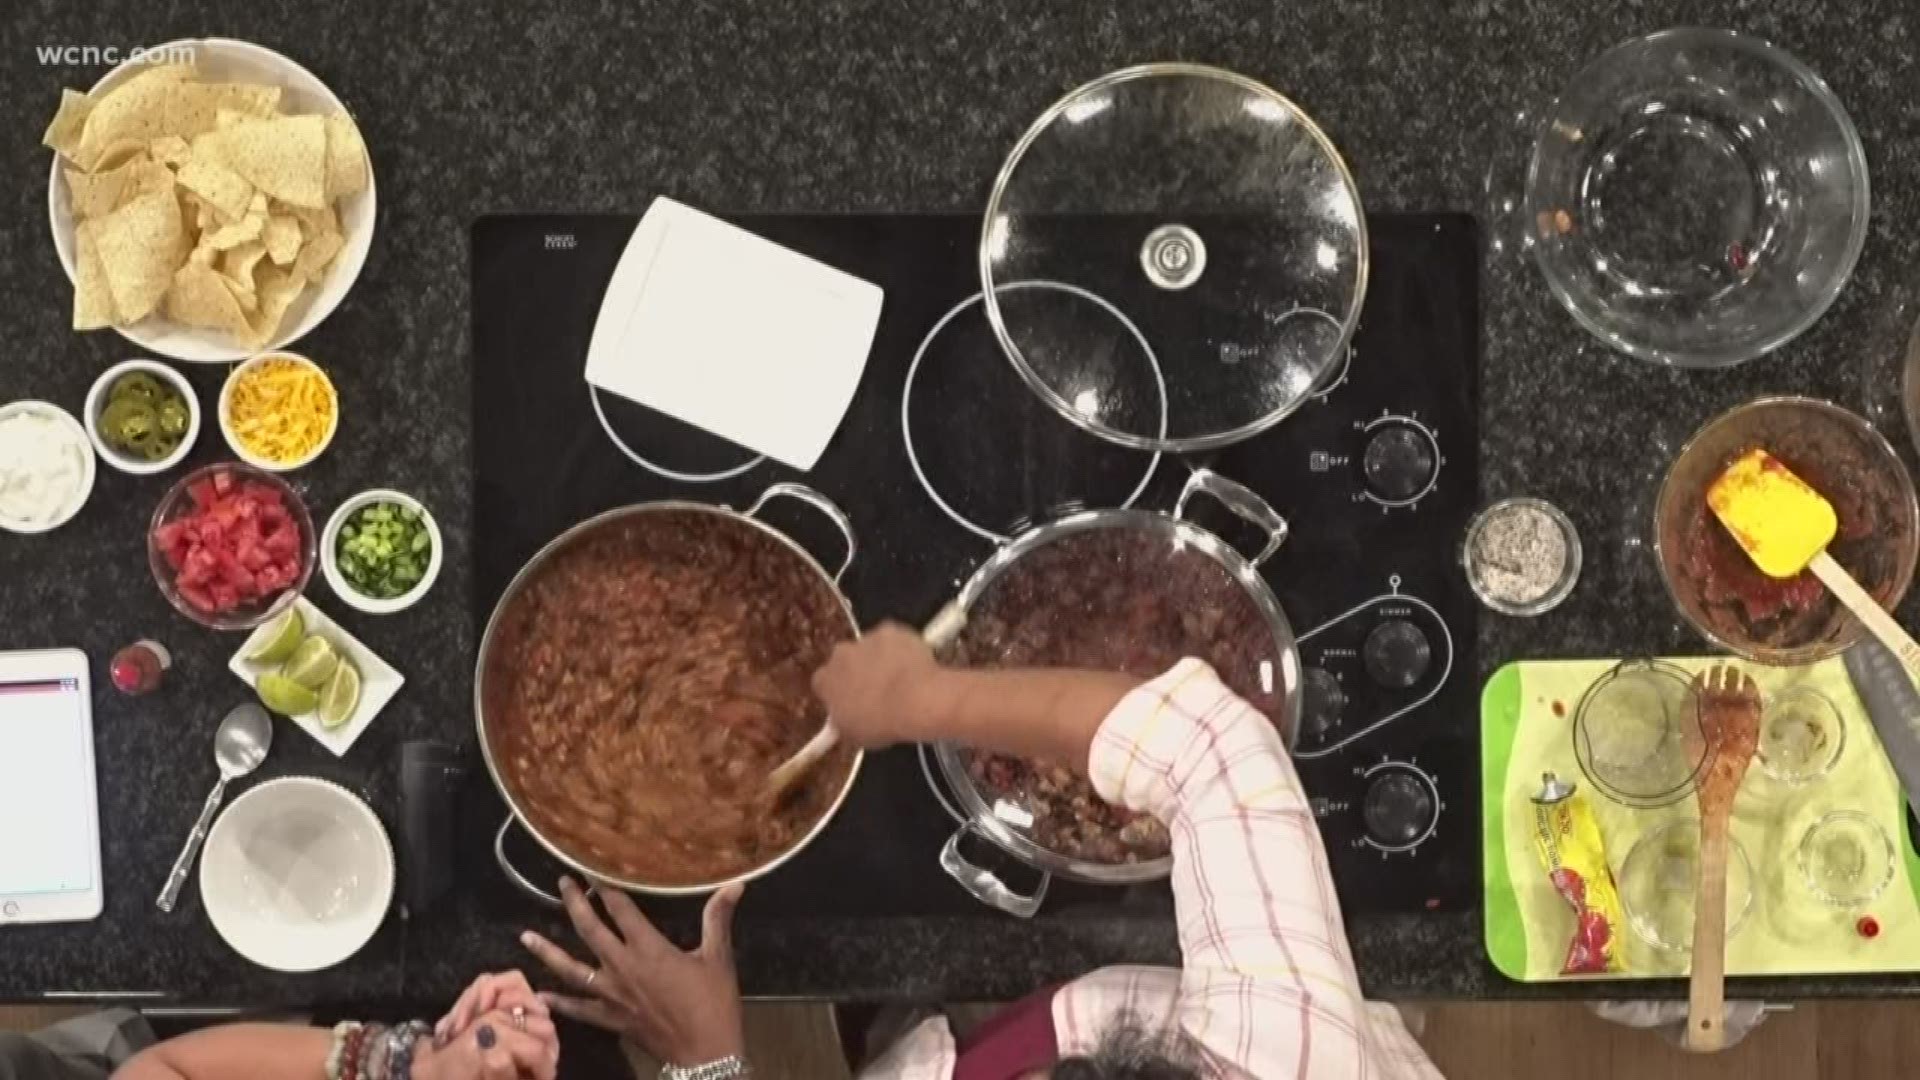 For National Chili Month, Andria Gaskins gives us her family recipe for flavorful, filling chili made with beans, turkey and pork.